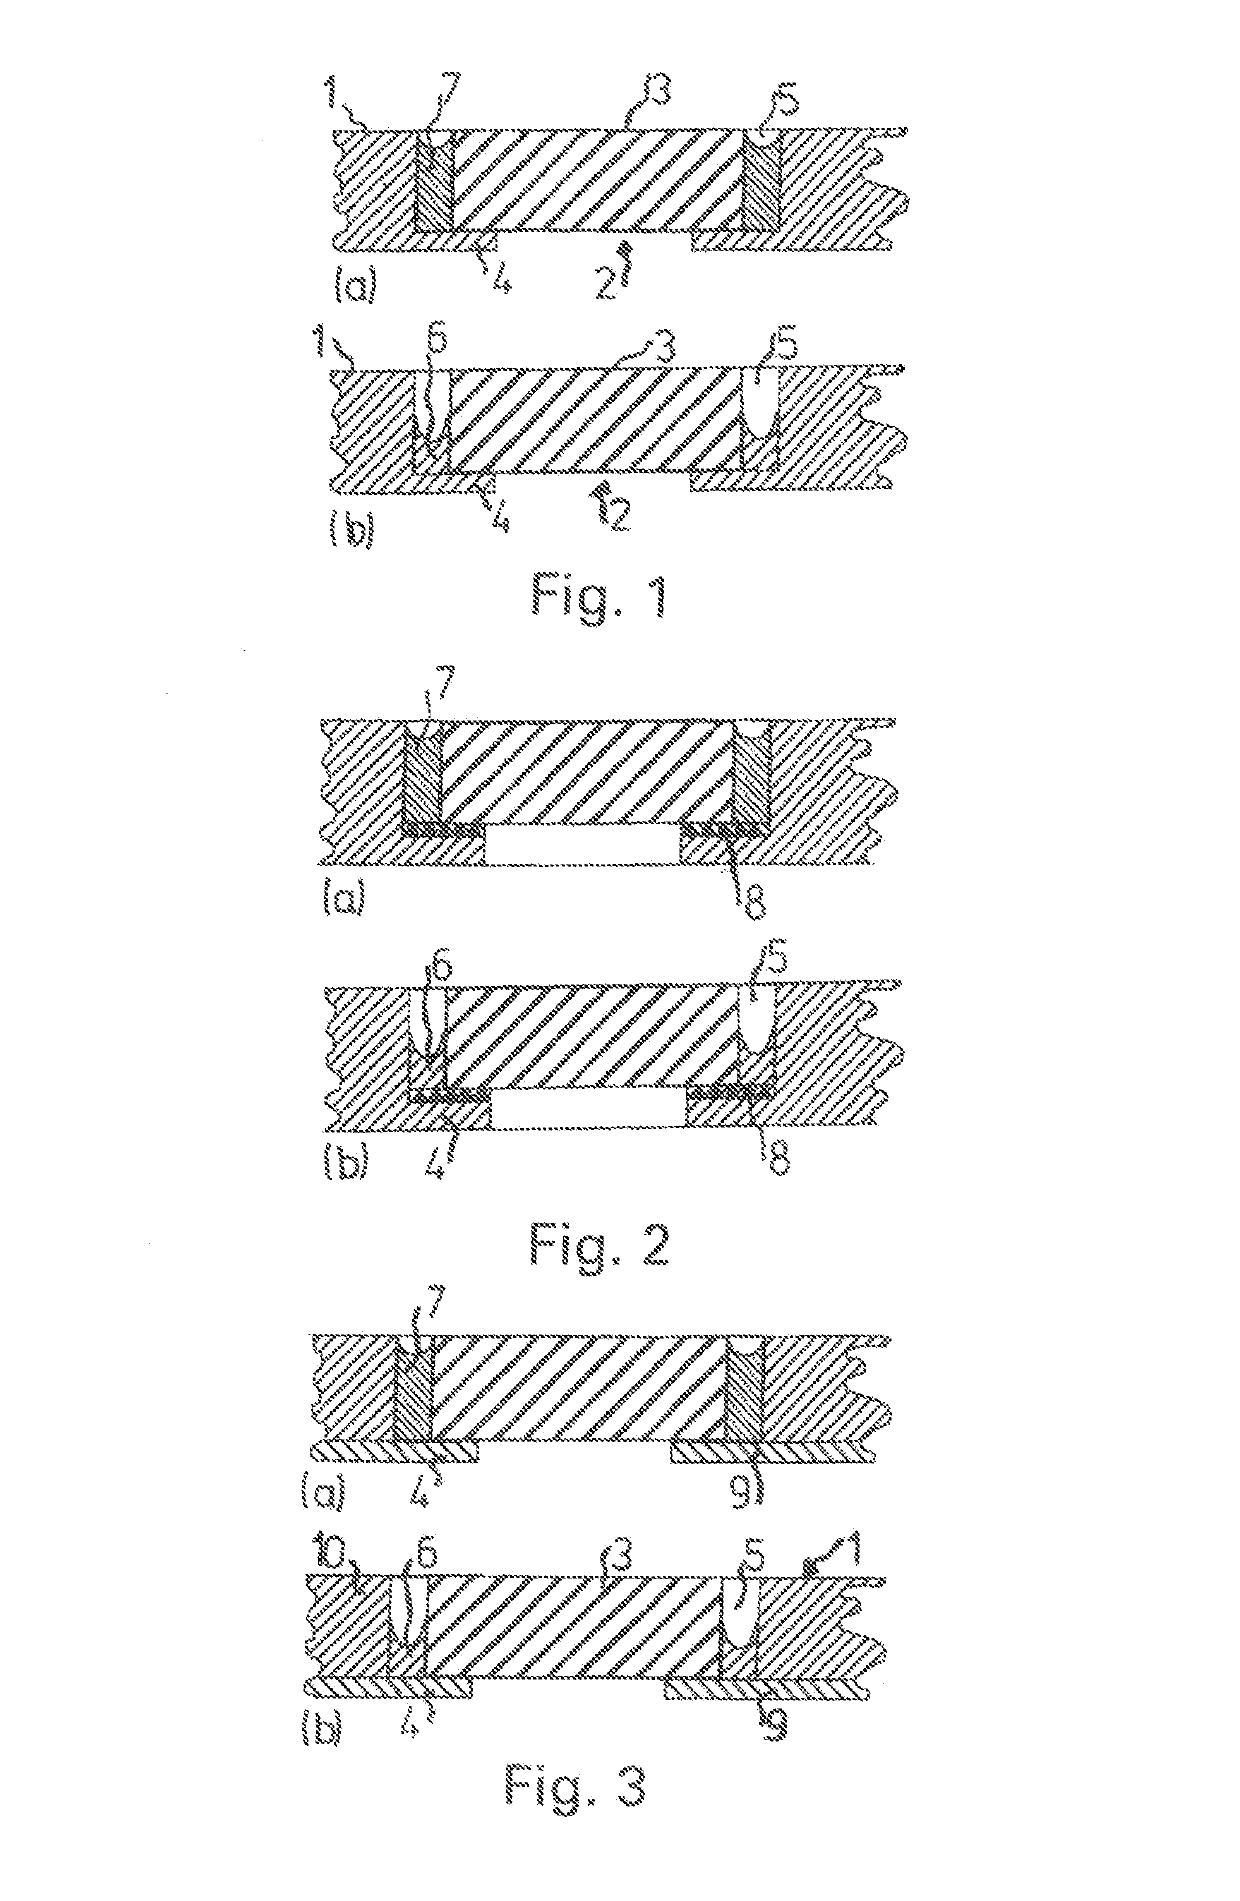 Method for connecting components of a microfluidic flow cell